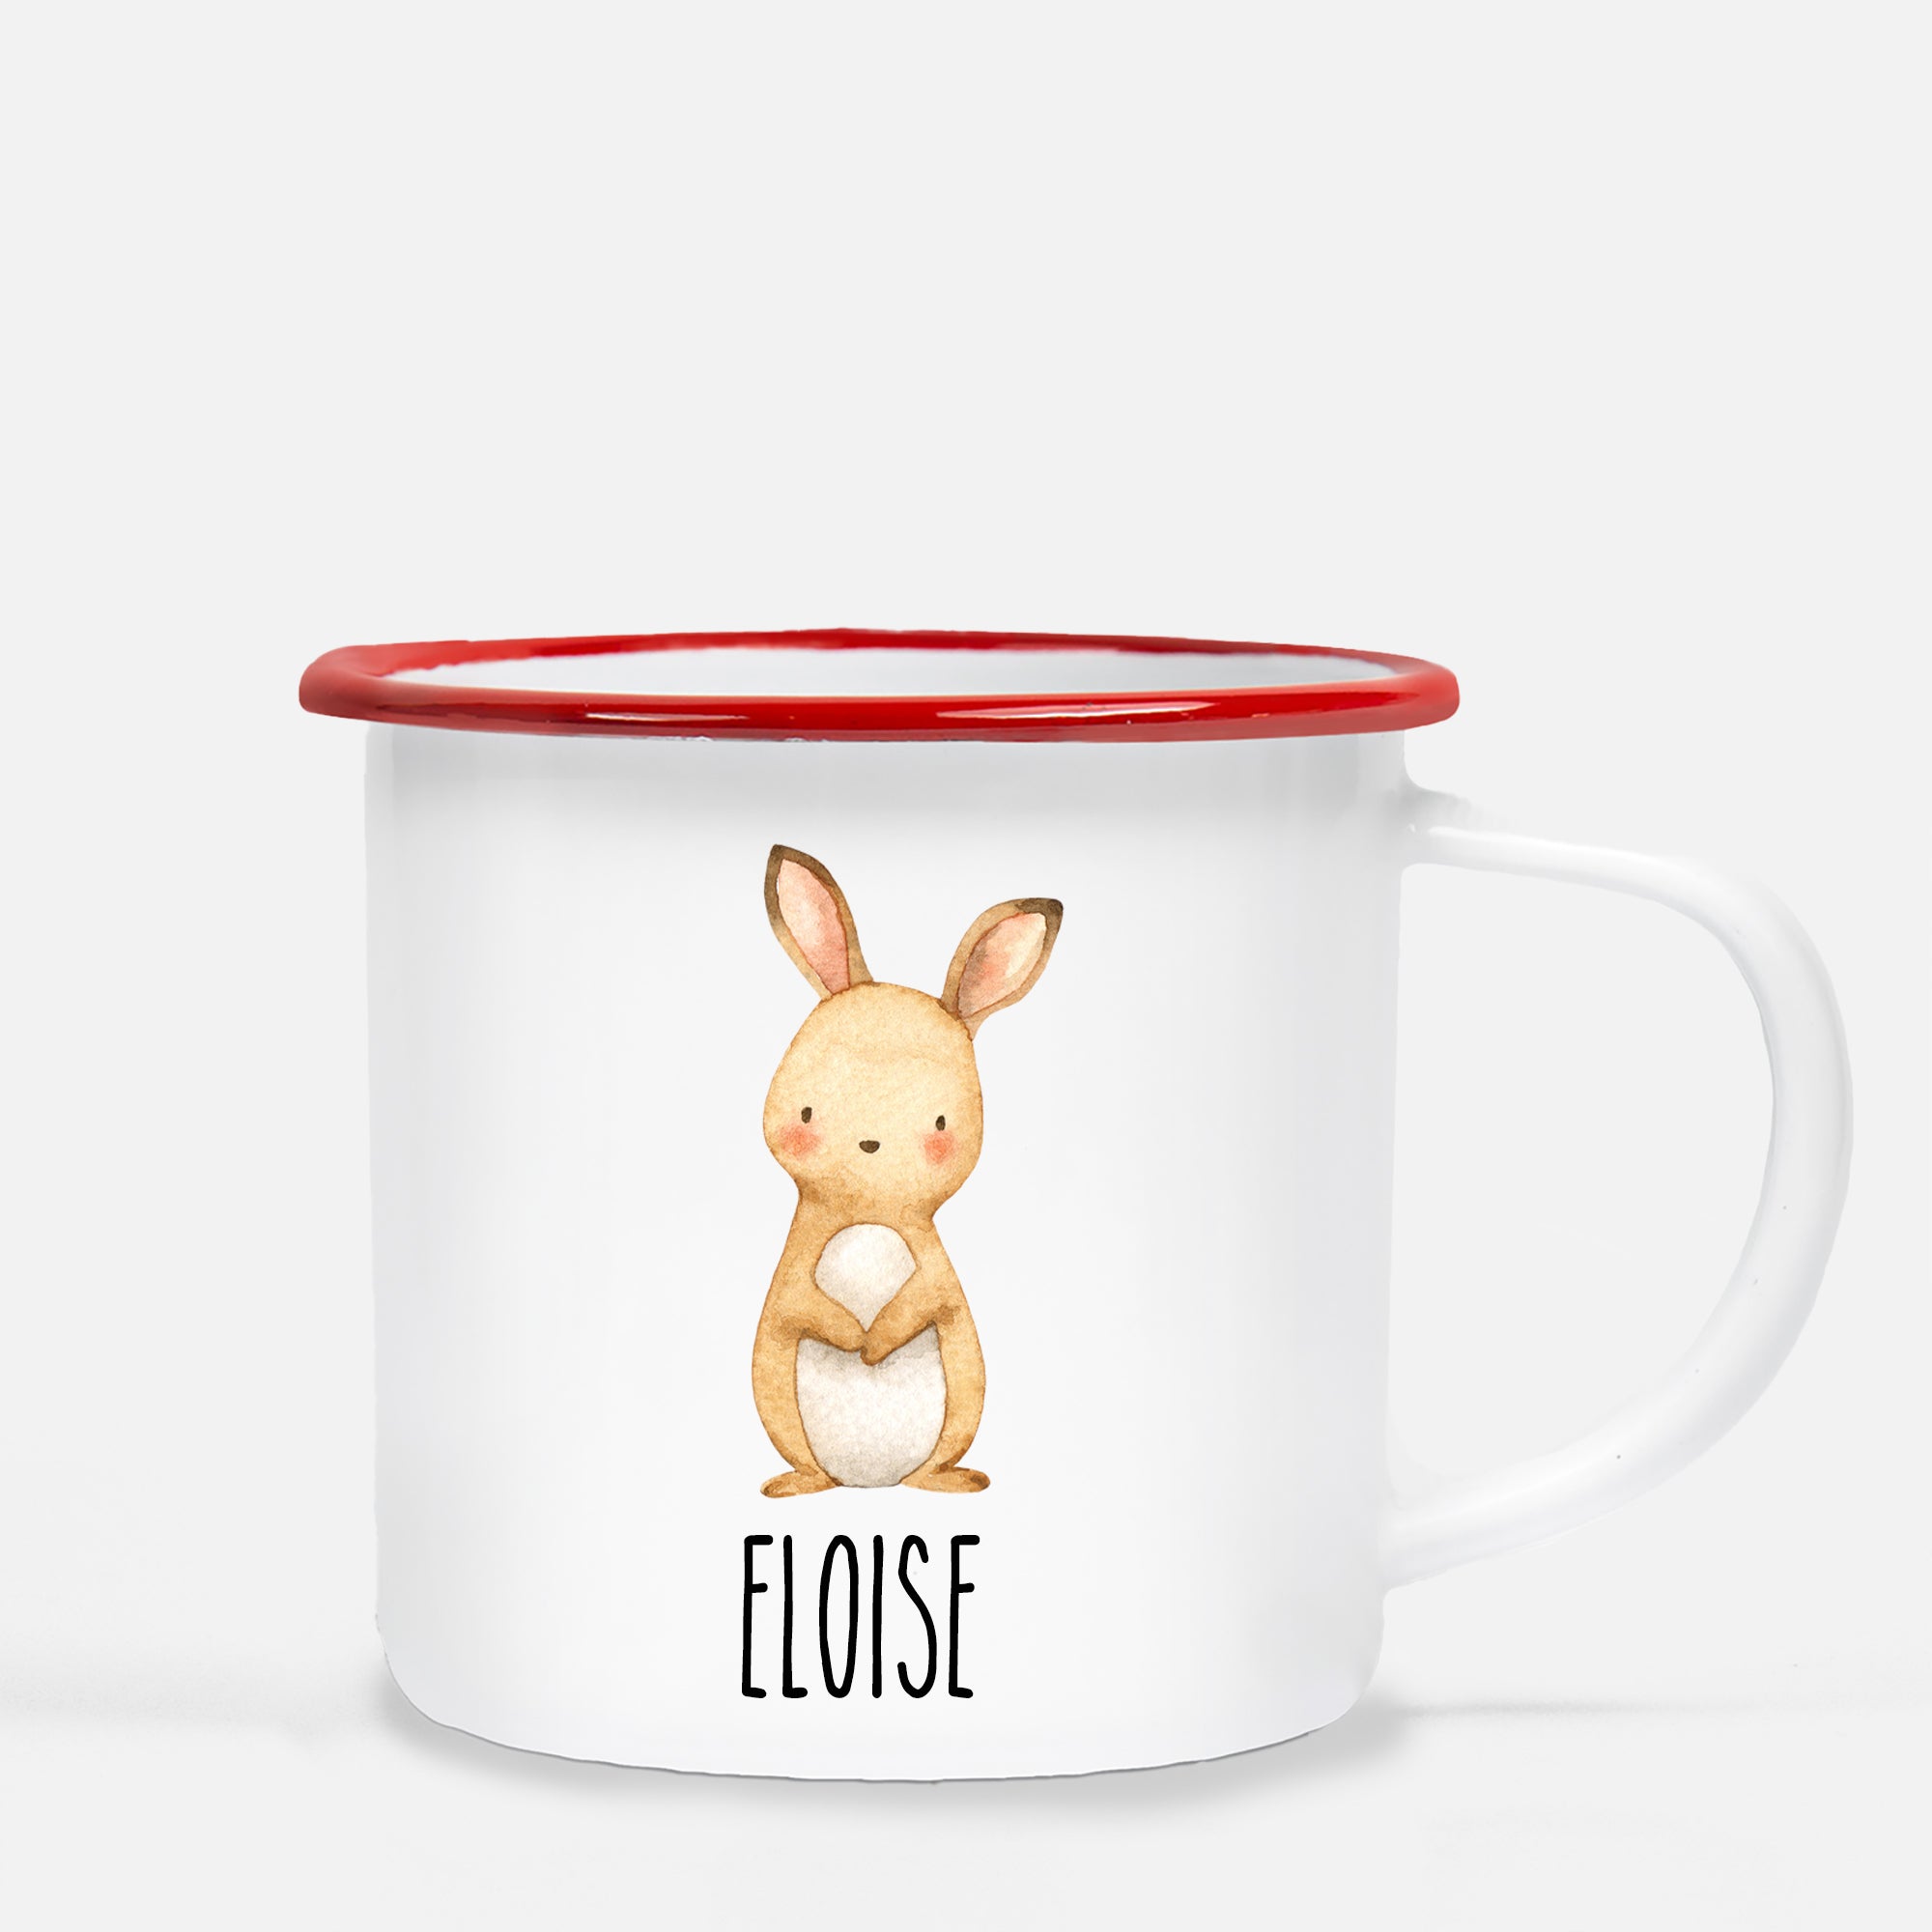 Bunny Personalized Camp Mug, Perfect for Easter, Pipsy.com, red lip